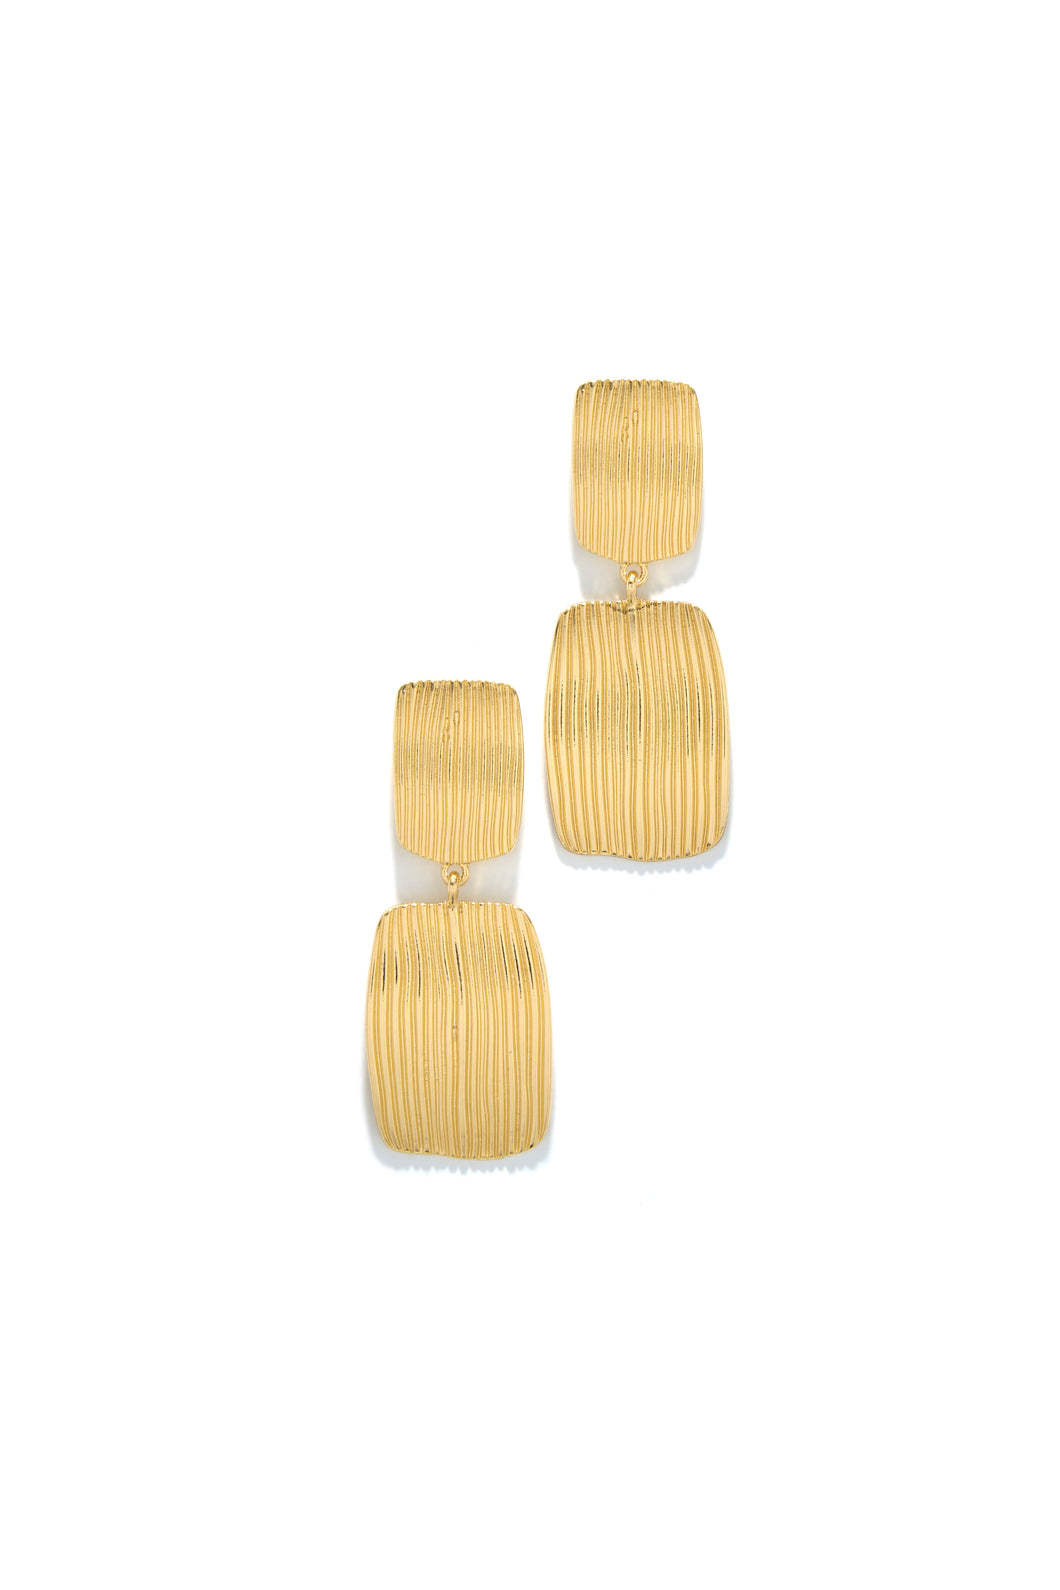 Earrings With Pushback Closure 